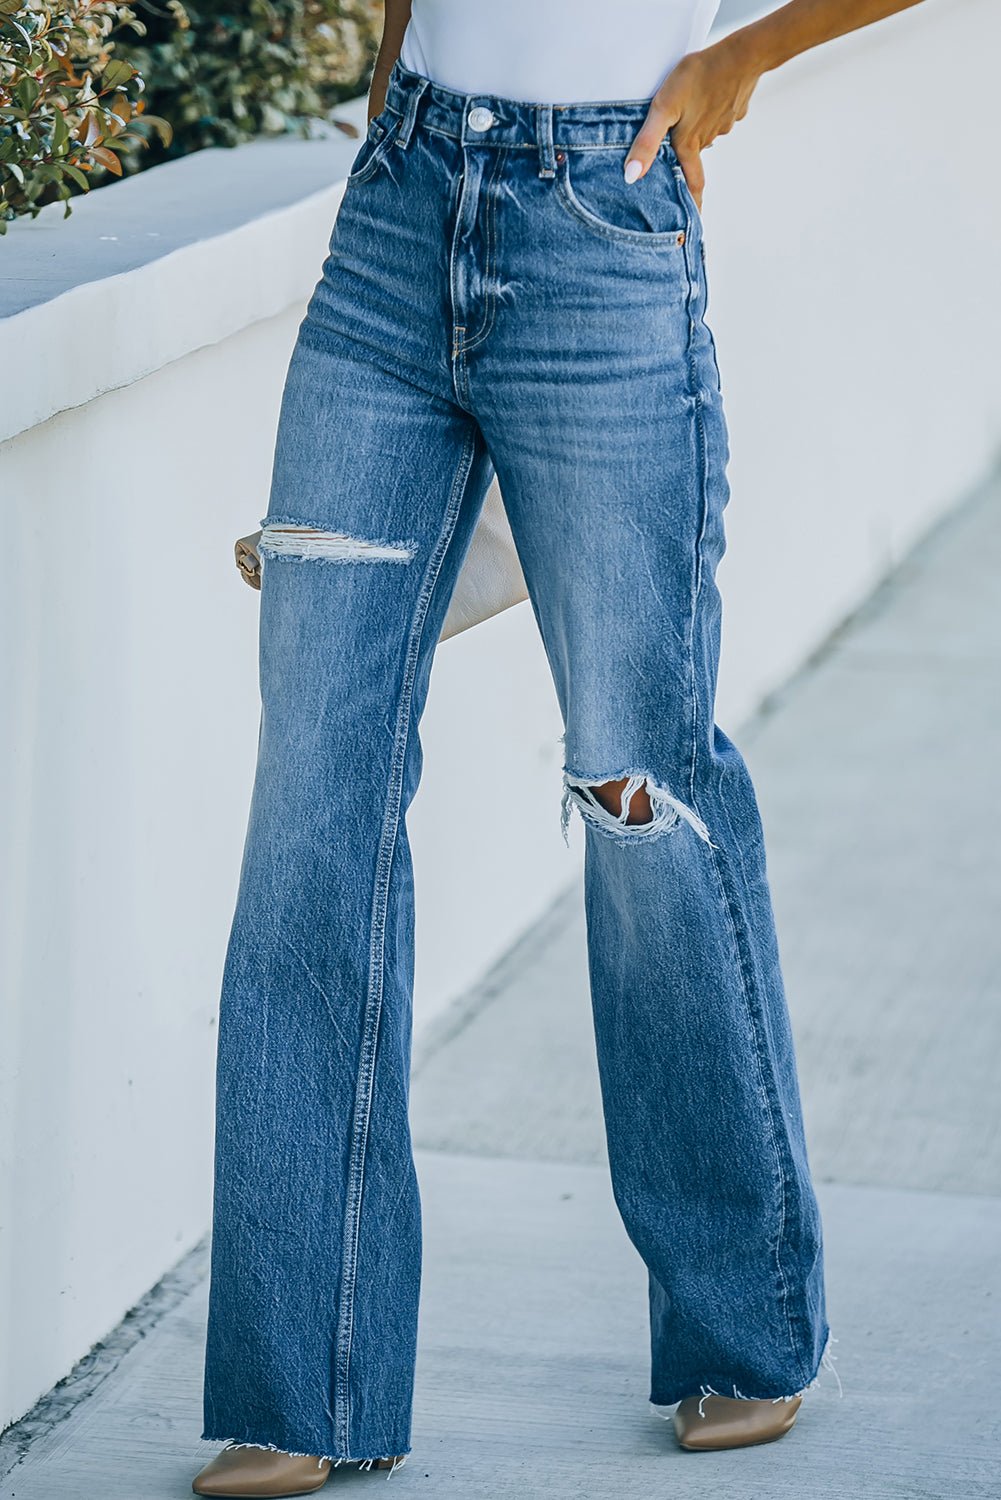 High-Rise Distressed Raw Hem Jeans - Fashion Girl Online Store